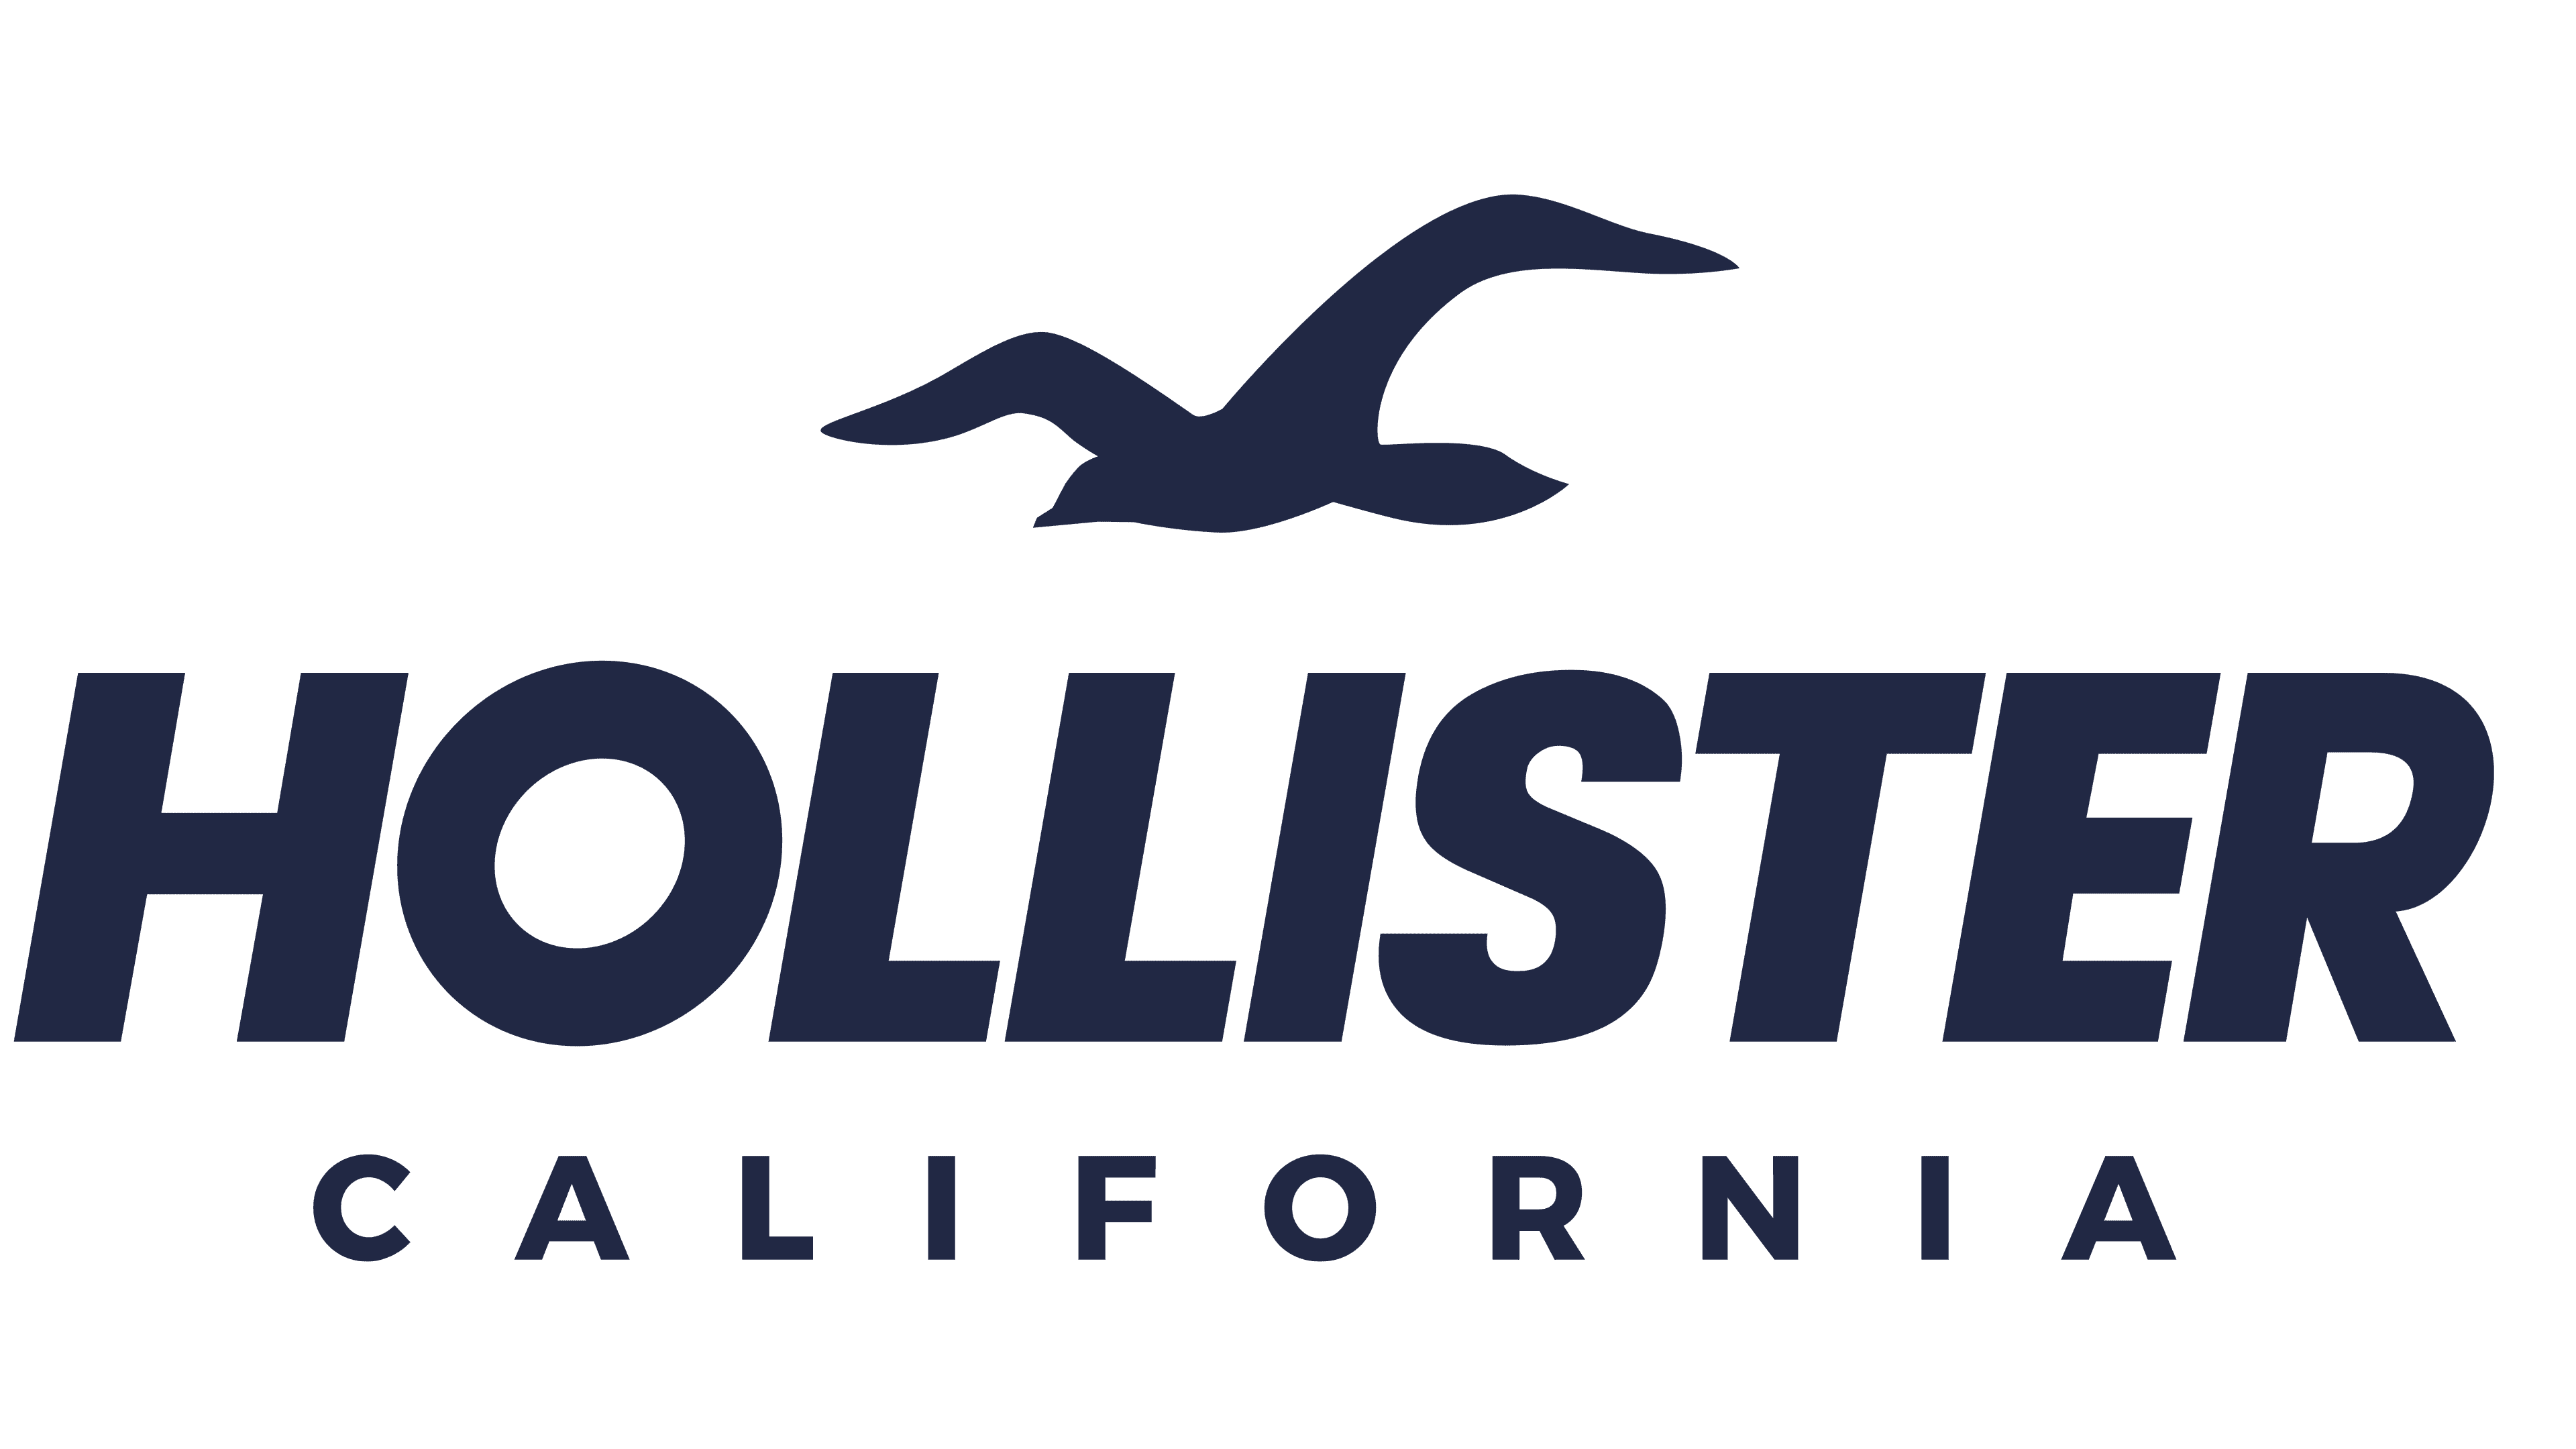 hollister logo meaning